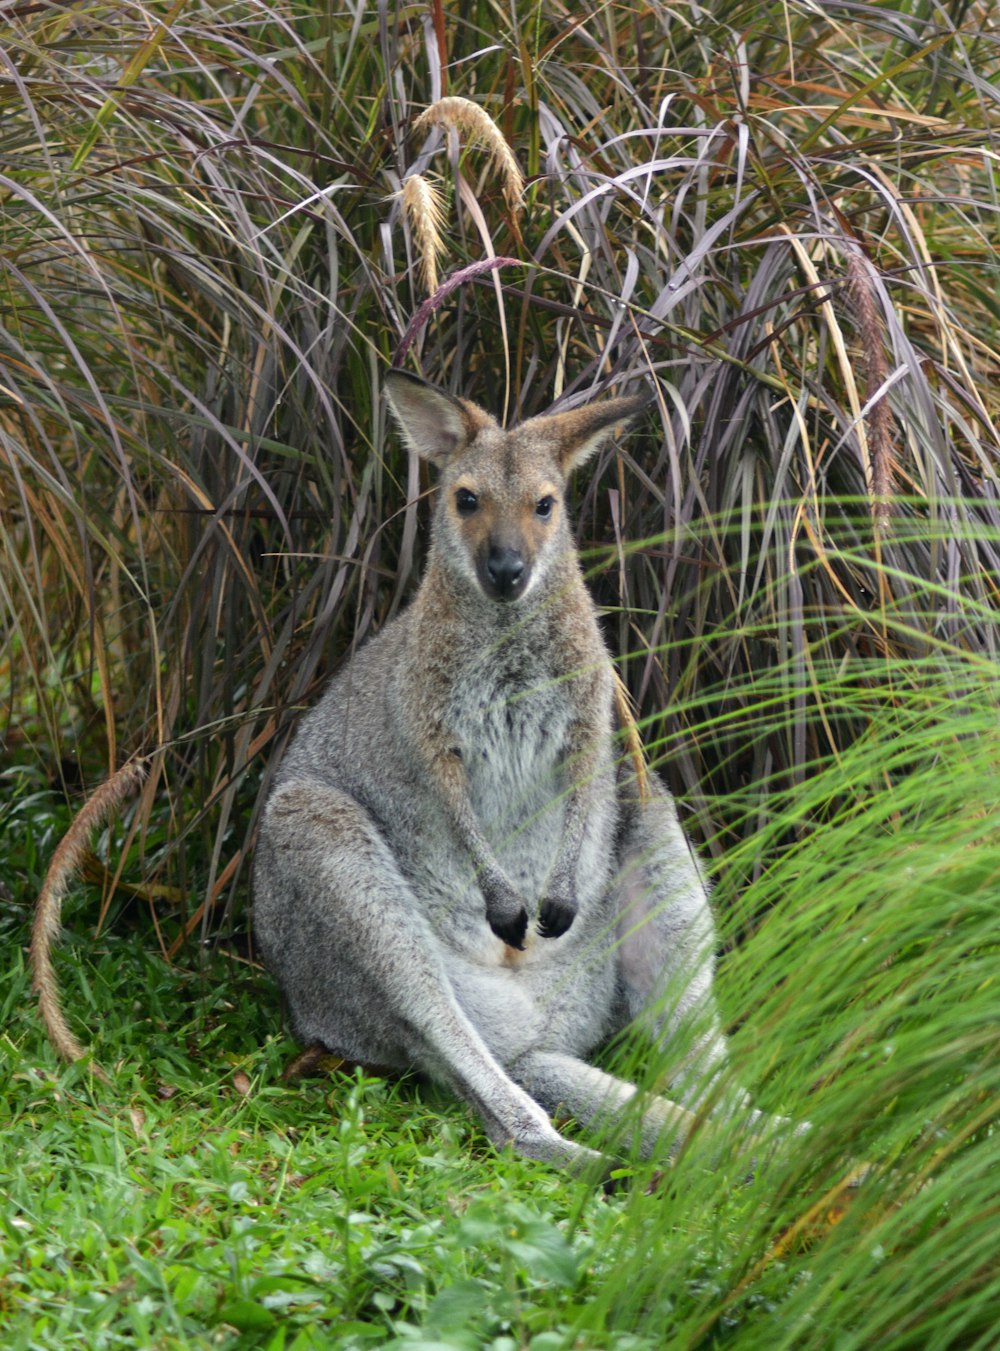 a kangaroo sitting in the grass with its front paws on the ground